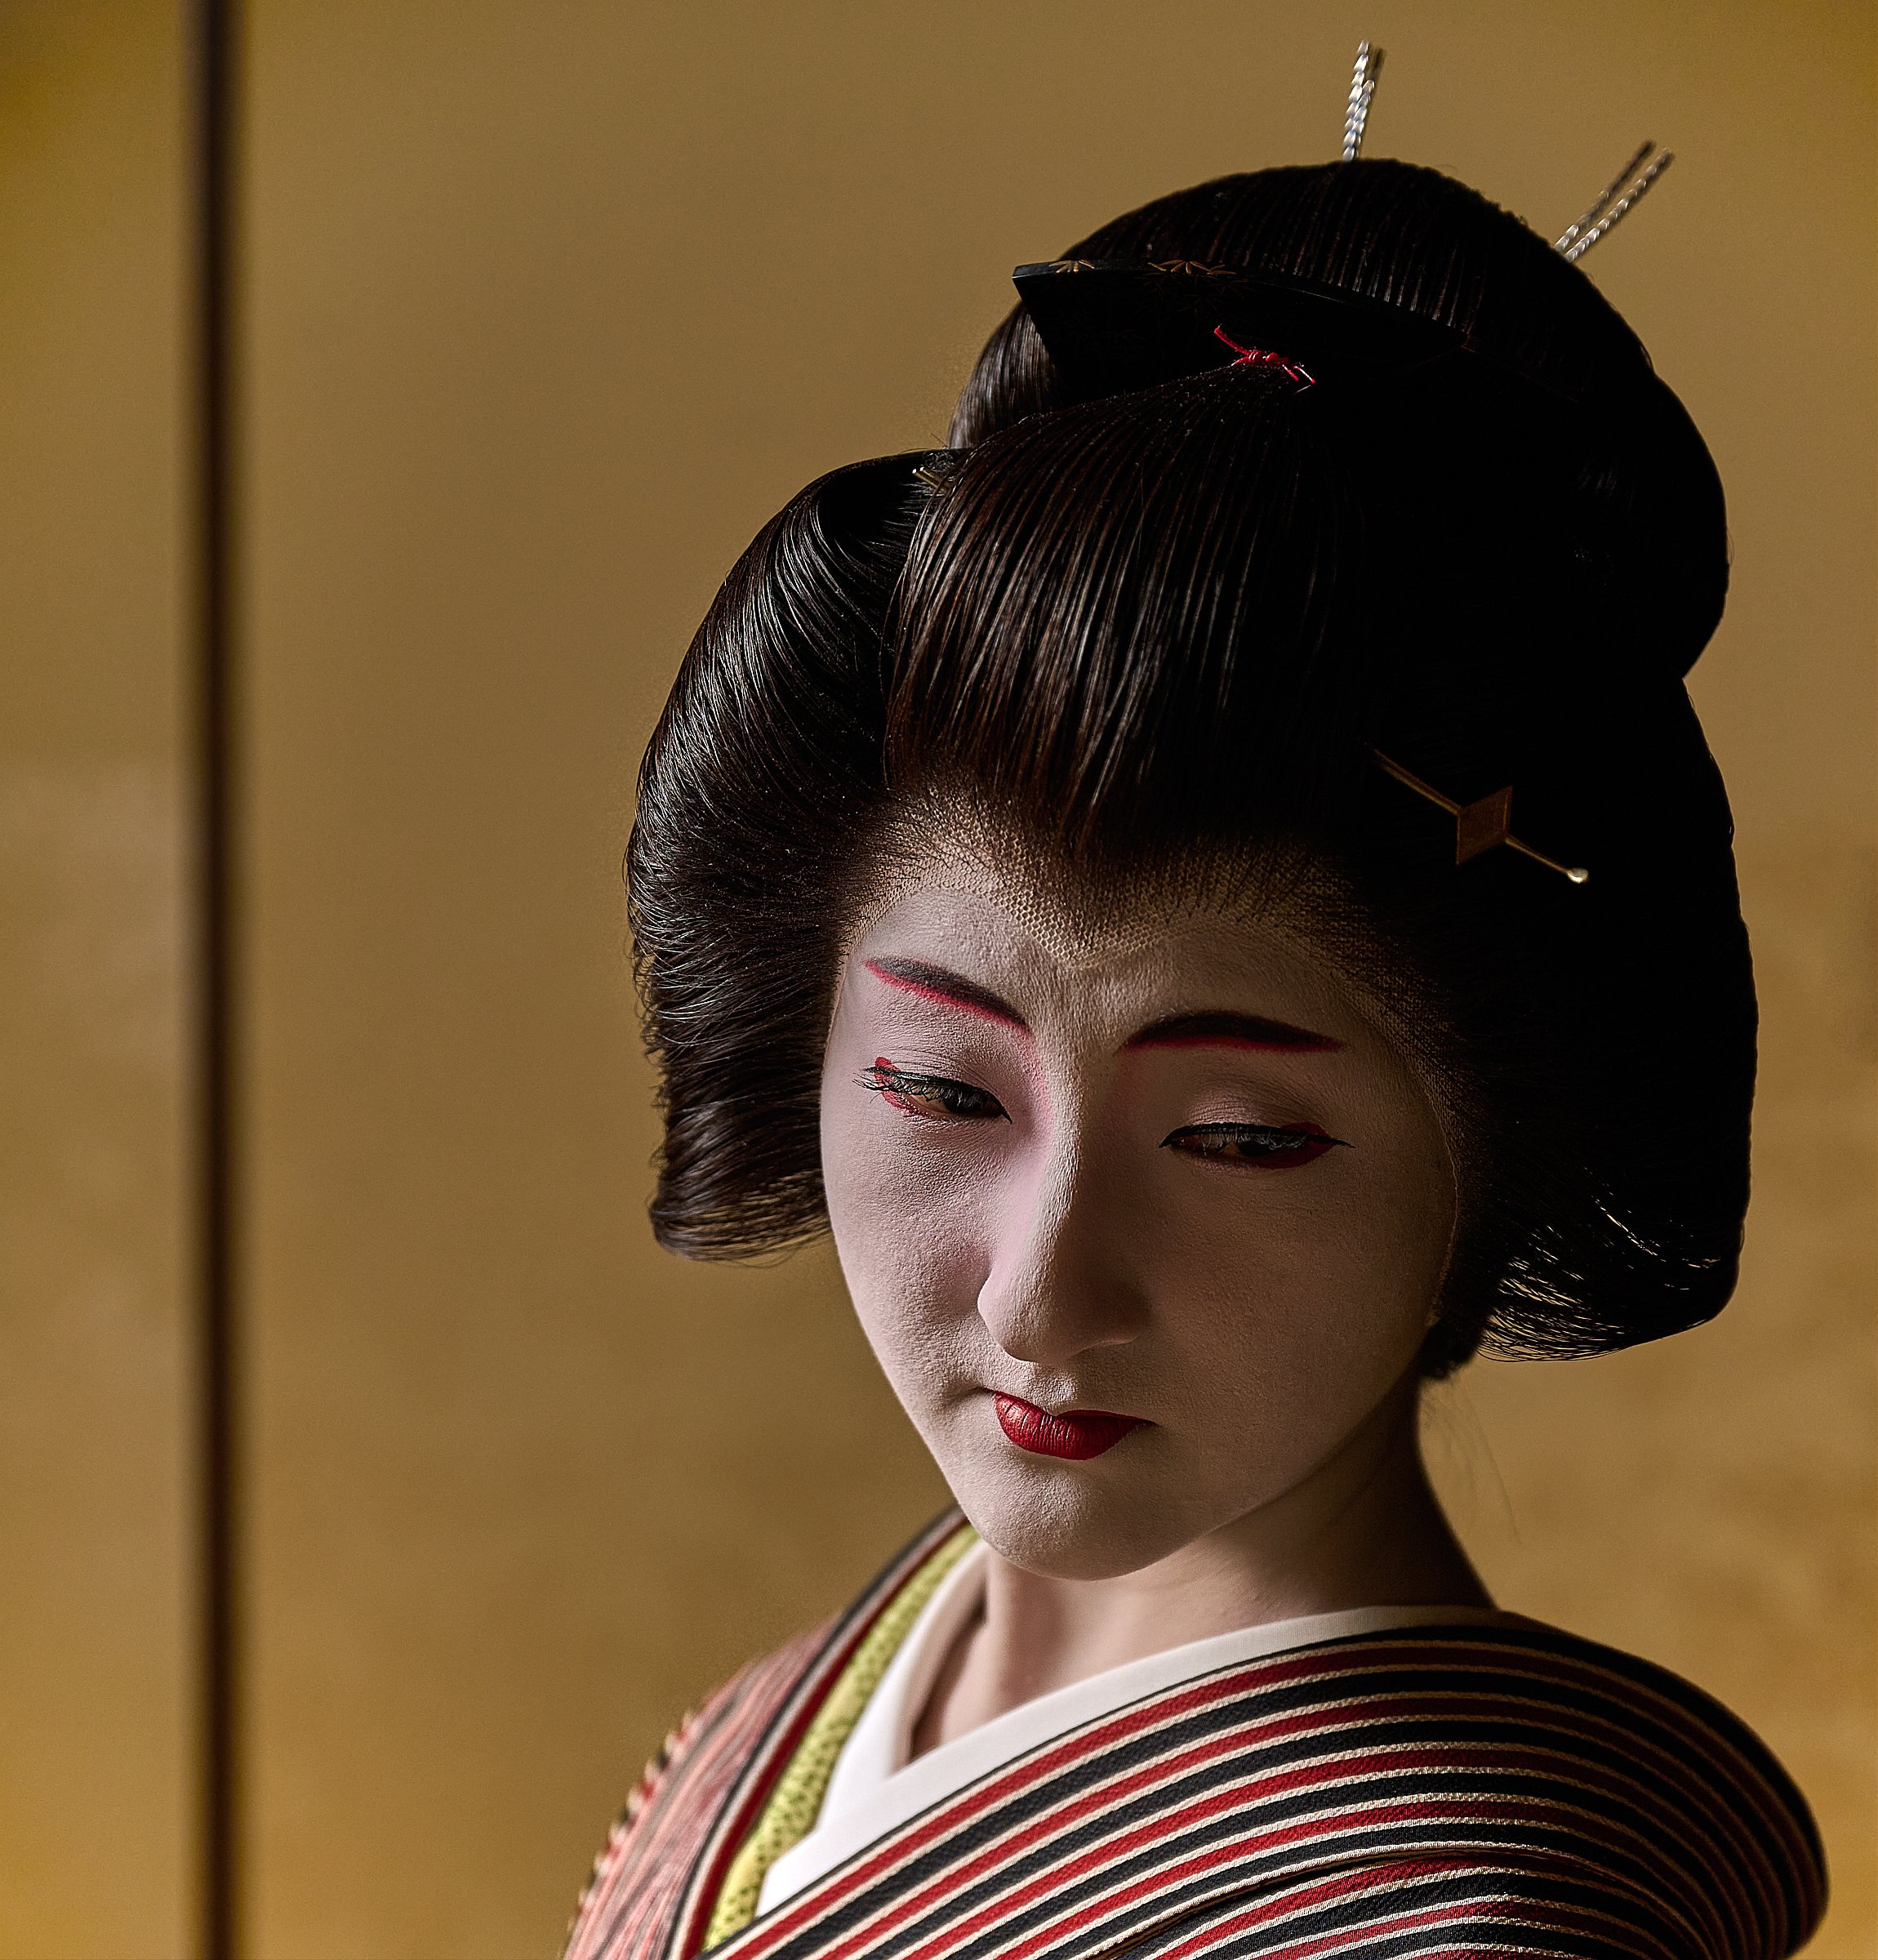 Combining an external gaiety and an internal sadness is the epitome of the geisha